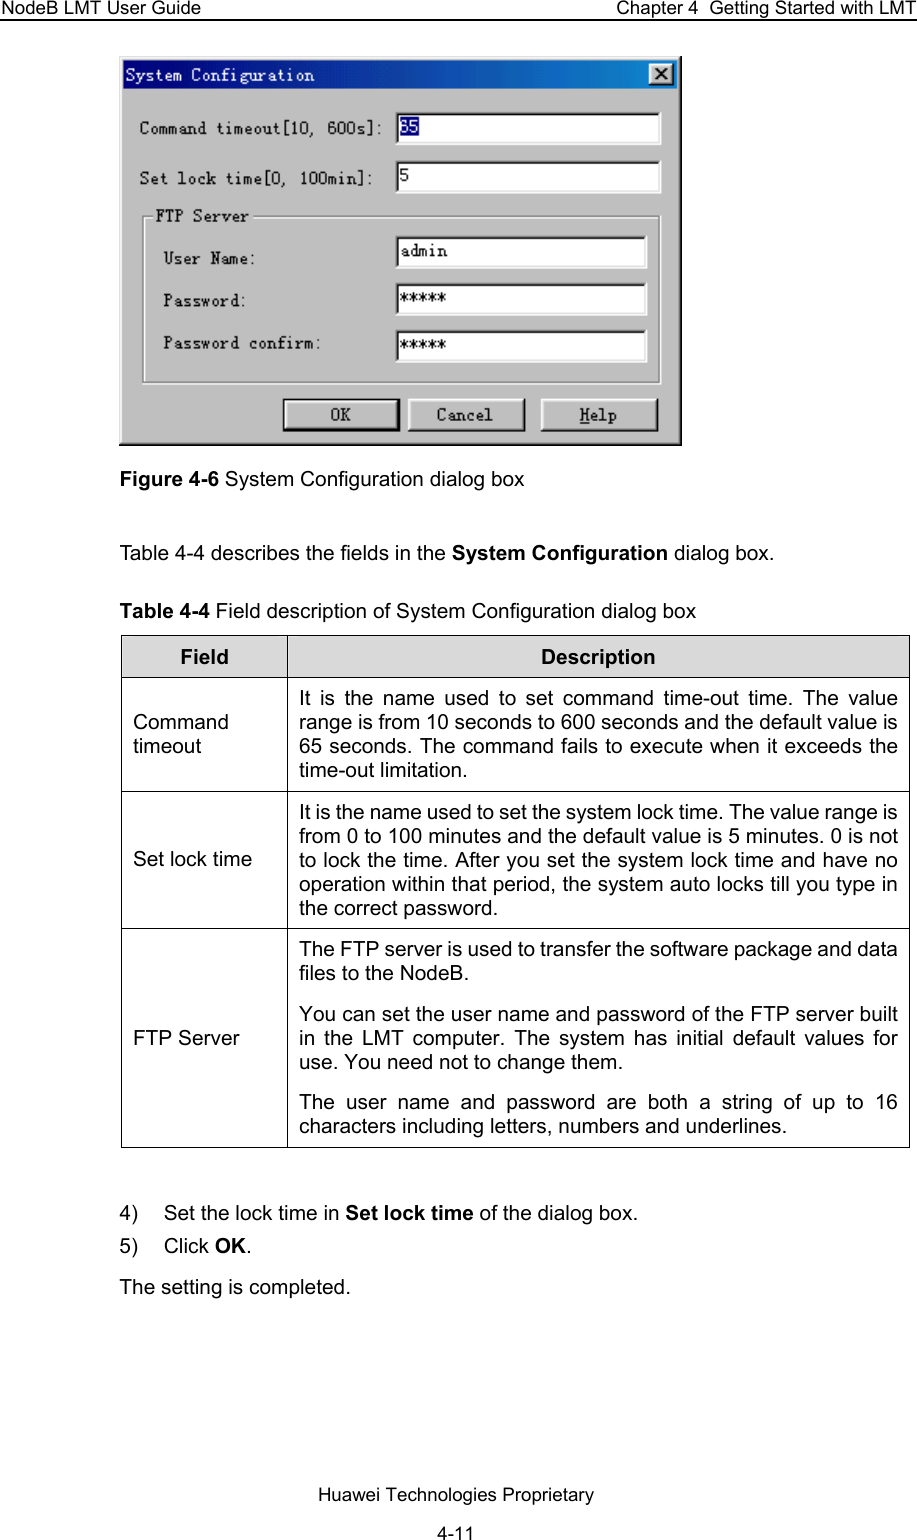 NodeB LMT User Guide  Chapter 4  Getting Started with LMT  Figure 4-6 System Configuration dialog box Table 4-4 describes the fields in the System Configuration dialog box.  Table 4-4 Field description of System Configuration dialog box  Field   Description  Command timeout  It is the name used to set command time-out time. The value range is from 10 seconds to 600 seconds and the default value is 65 seconds. The command fails to execute when it exceeds the time-out limitation.  Set lock time  It is the name used to set the system lock time. The value range is from 0 to 100 minutes and the default value is 5 minutes. 0 is not to lock the time. After you set the system lock time and have no operation within that period, the system auto locks till you type in the correct password.  FTP Server  The FTP server is used to transfer the software package and data files to the NodeB.  You can set the user name and password of the FTP server built in the LMT computer. The system has initial default values for use. You need not to change them.  The user name and password are both a string of up to 16 characters including letters, numbers and underlines.   4)  Set the lock time in Set lock time of the dialog box.  5) Click OK. The setting is completed.  Huawei Technologies Proprietary 4-11 